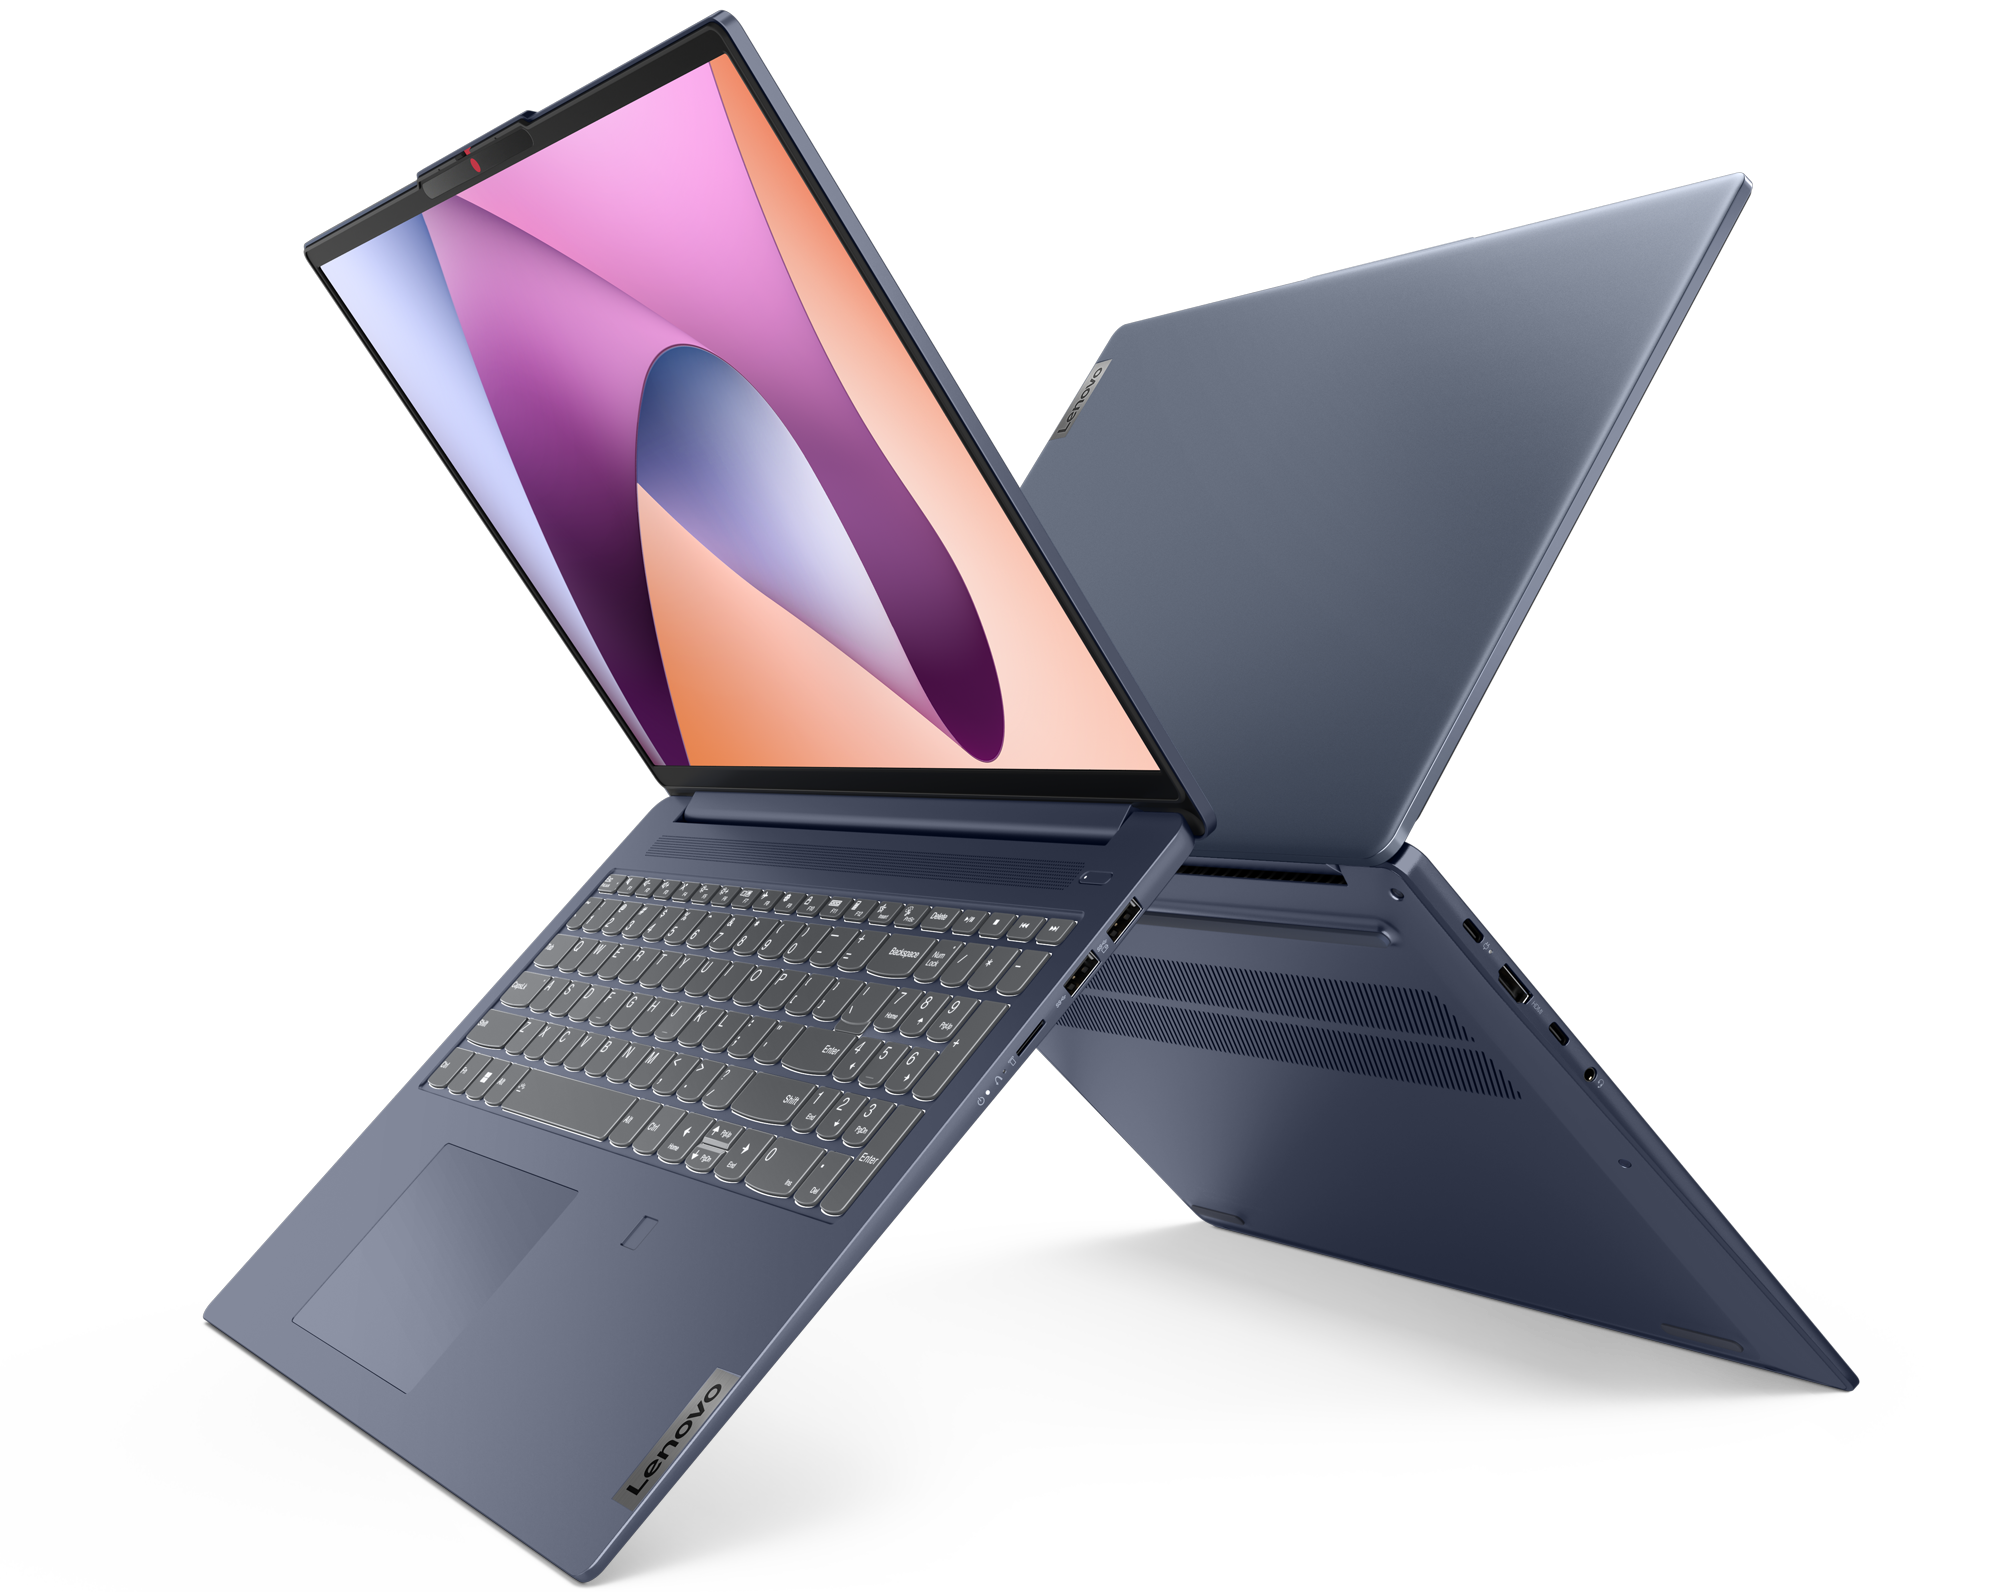 ASUS ROG Zephyrus G14 with AMD Ryzen 7000HS CPU has been pictured as well 